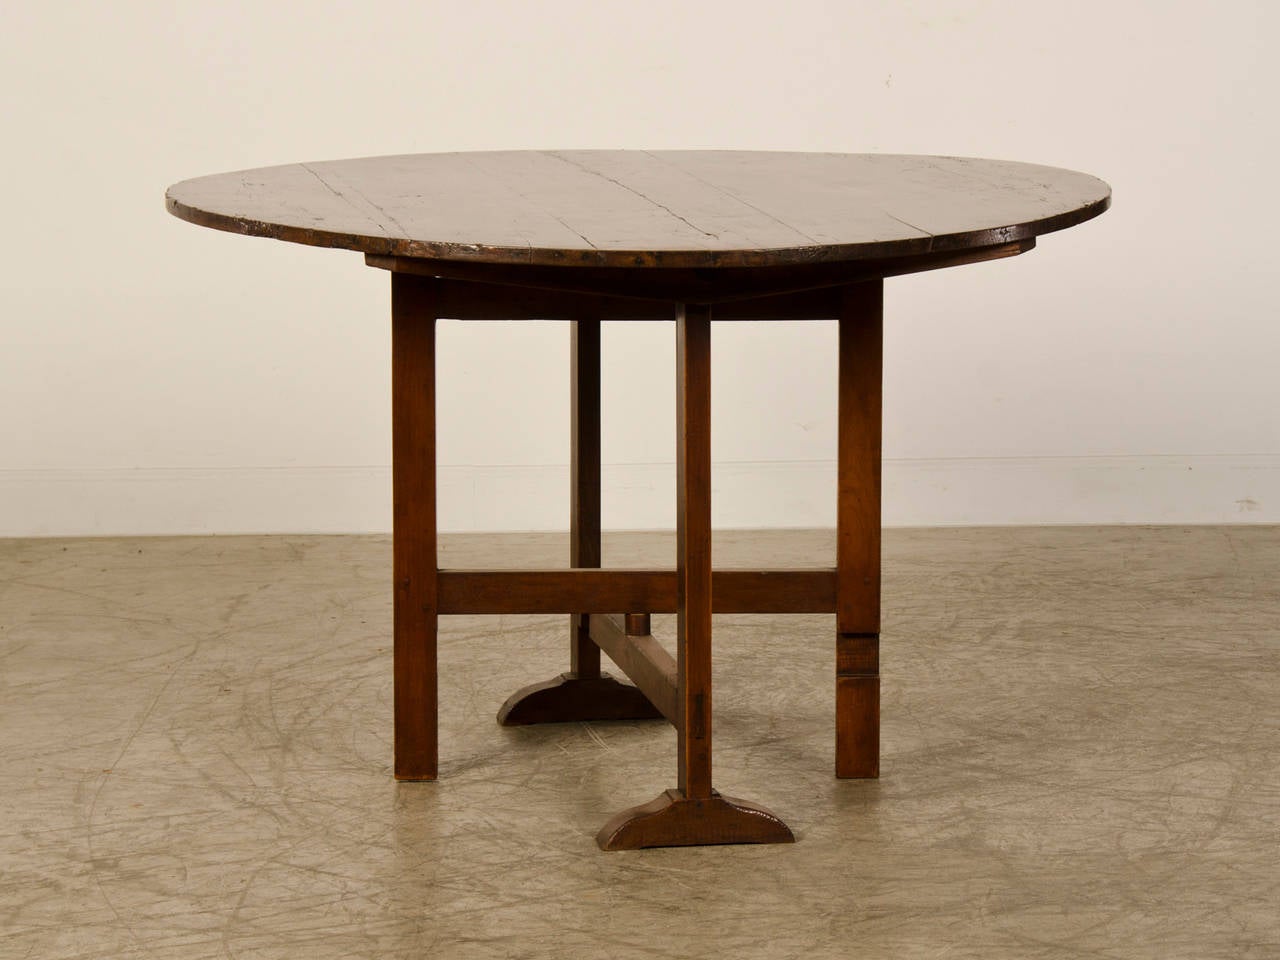 A handsome dark cherrywood wine table from France c. 1860 having a fully functioning tilt-top with a working leg mechanism that moves 90 degrees to support the table top with four sturdy legs. The planks on the round top are connected with